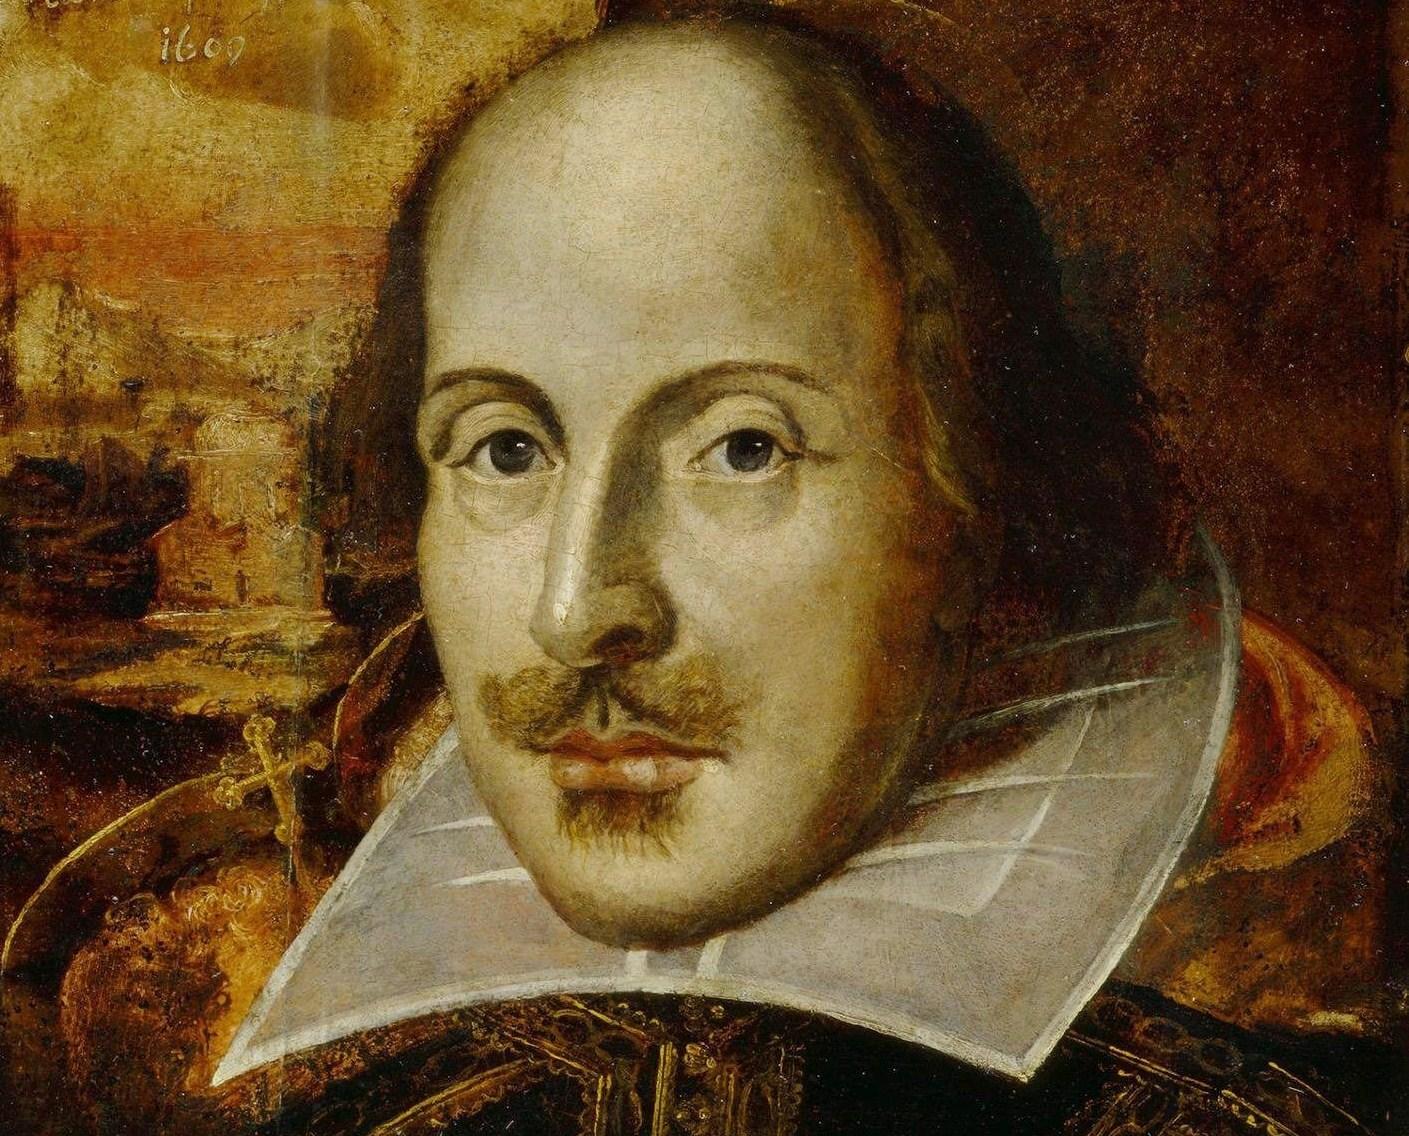 Today Is The 450th Anniversary Of Shakespeare’s Birth